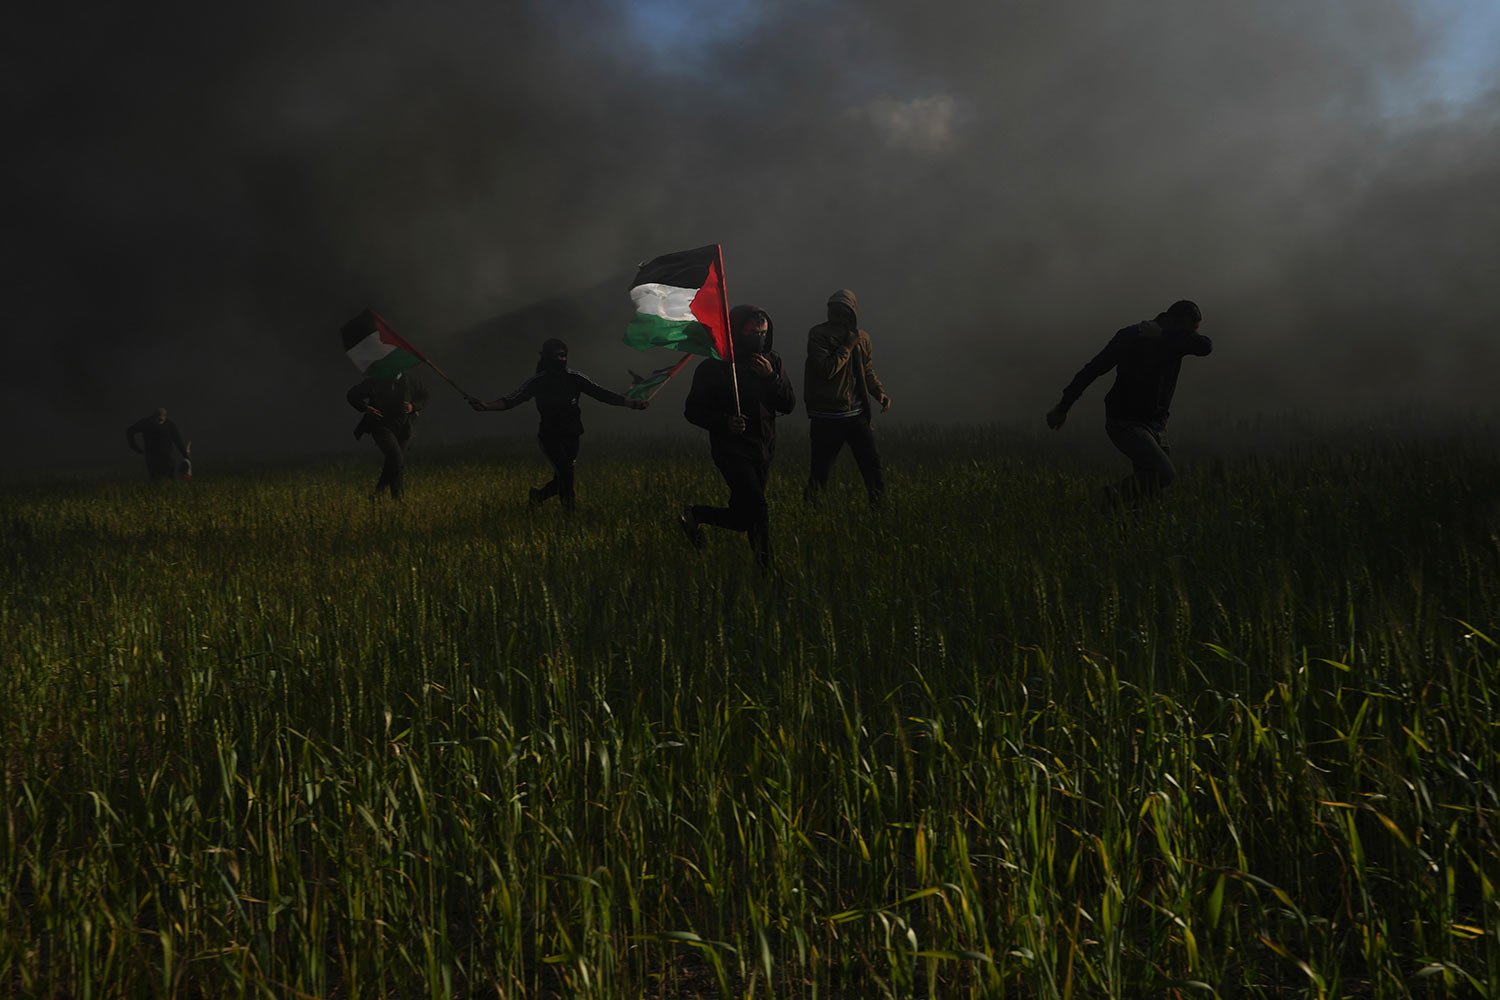  Palestinians carry national flags during a protest against Israeli military raid in the West Bank city of Nablus, along the border fence with Israel, east of Gaza City, Wednesday, Feb. 22, 2023. (AP Photo/Adel Hana) 